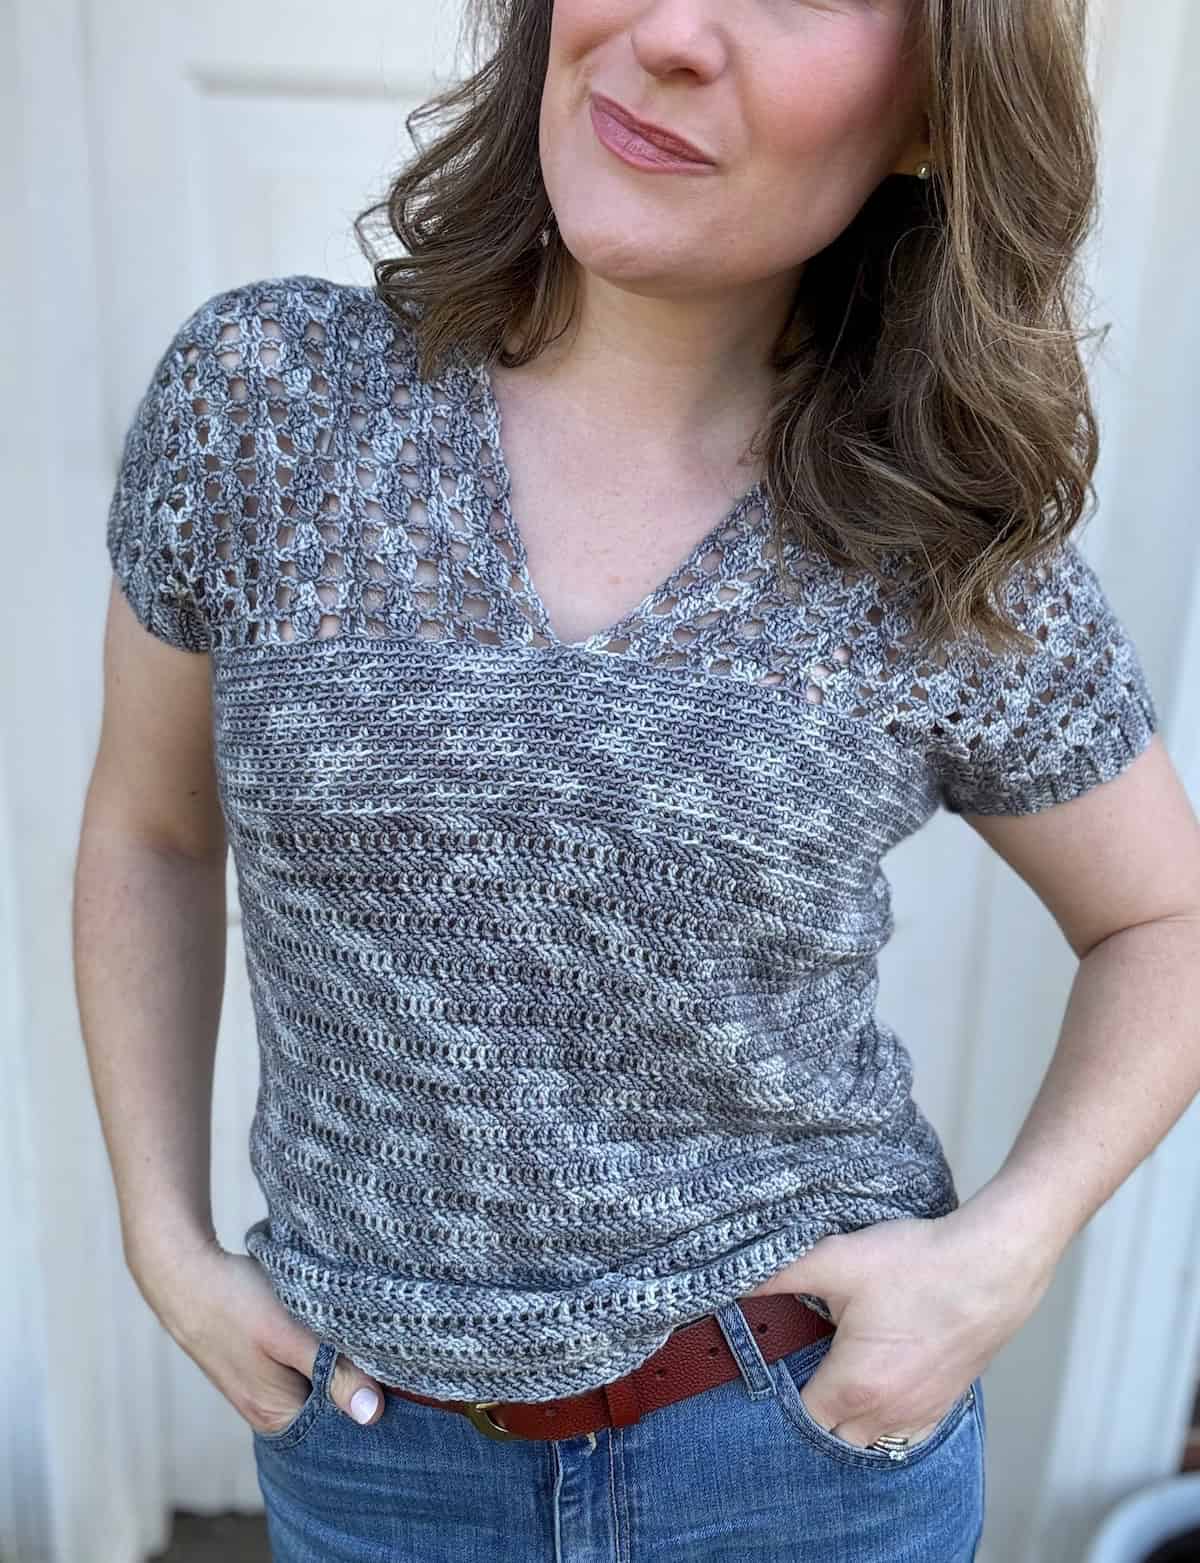 A person standing with hands in pockets, wearing a gray v neck crochet top and blue jeans, against a white background.